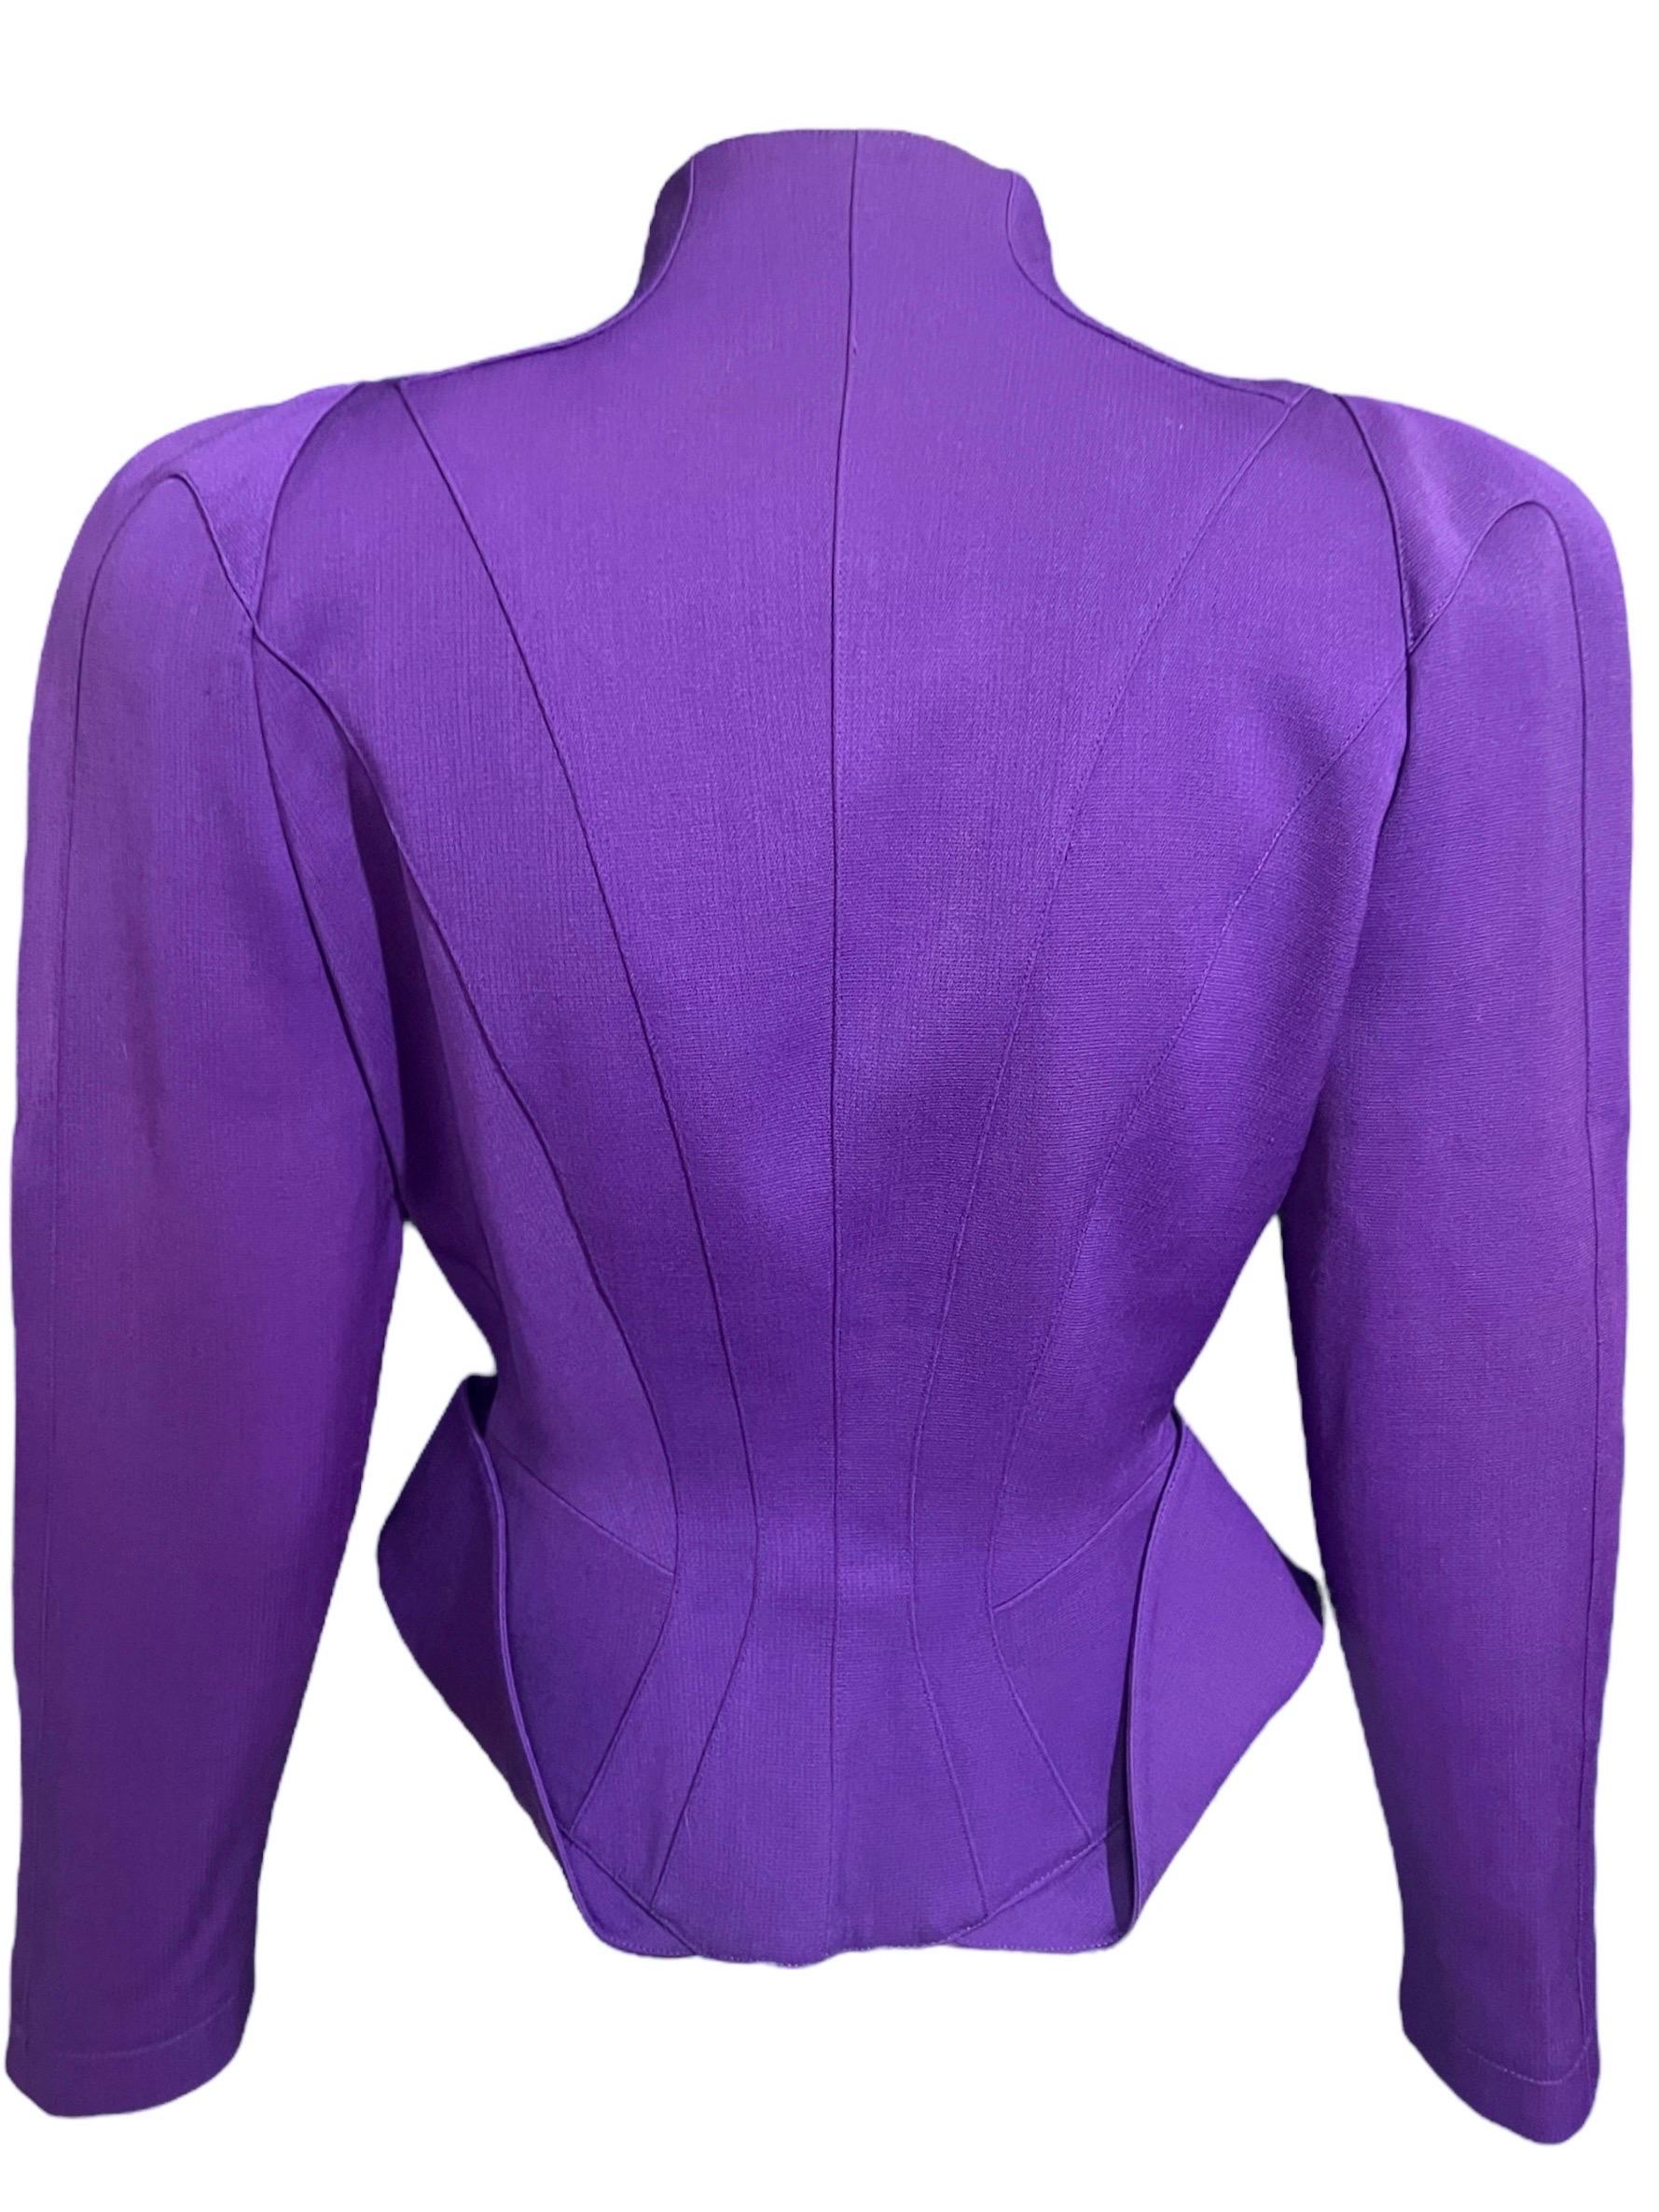 F/W 1988 Thierry Mugler Purple Futuristic Les Infernales Sculptural Jacket For Sale 4